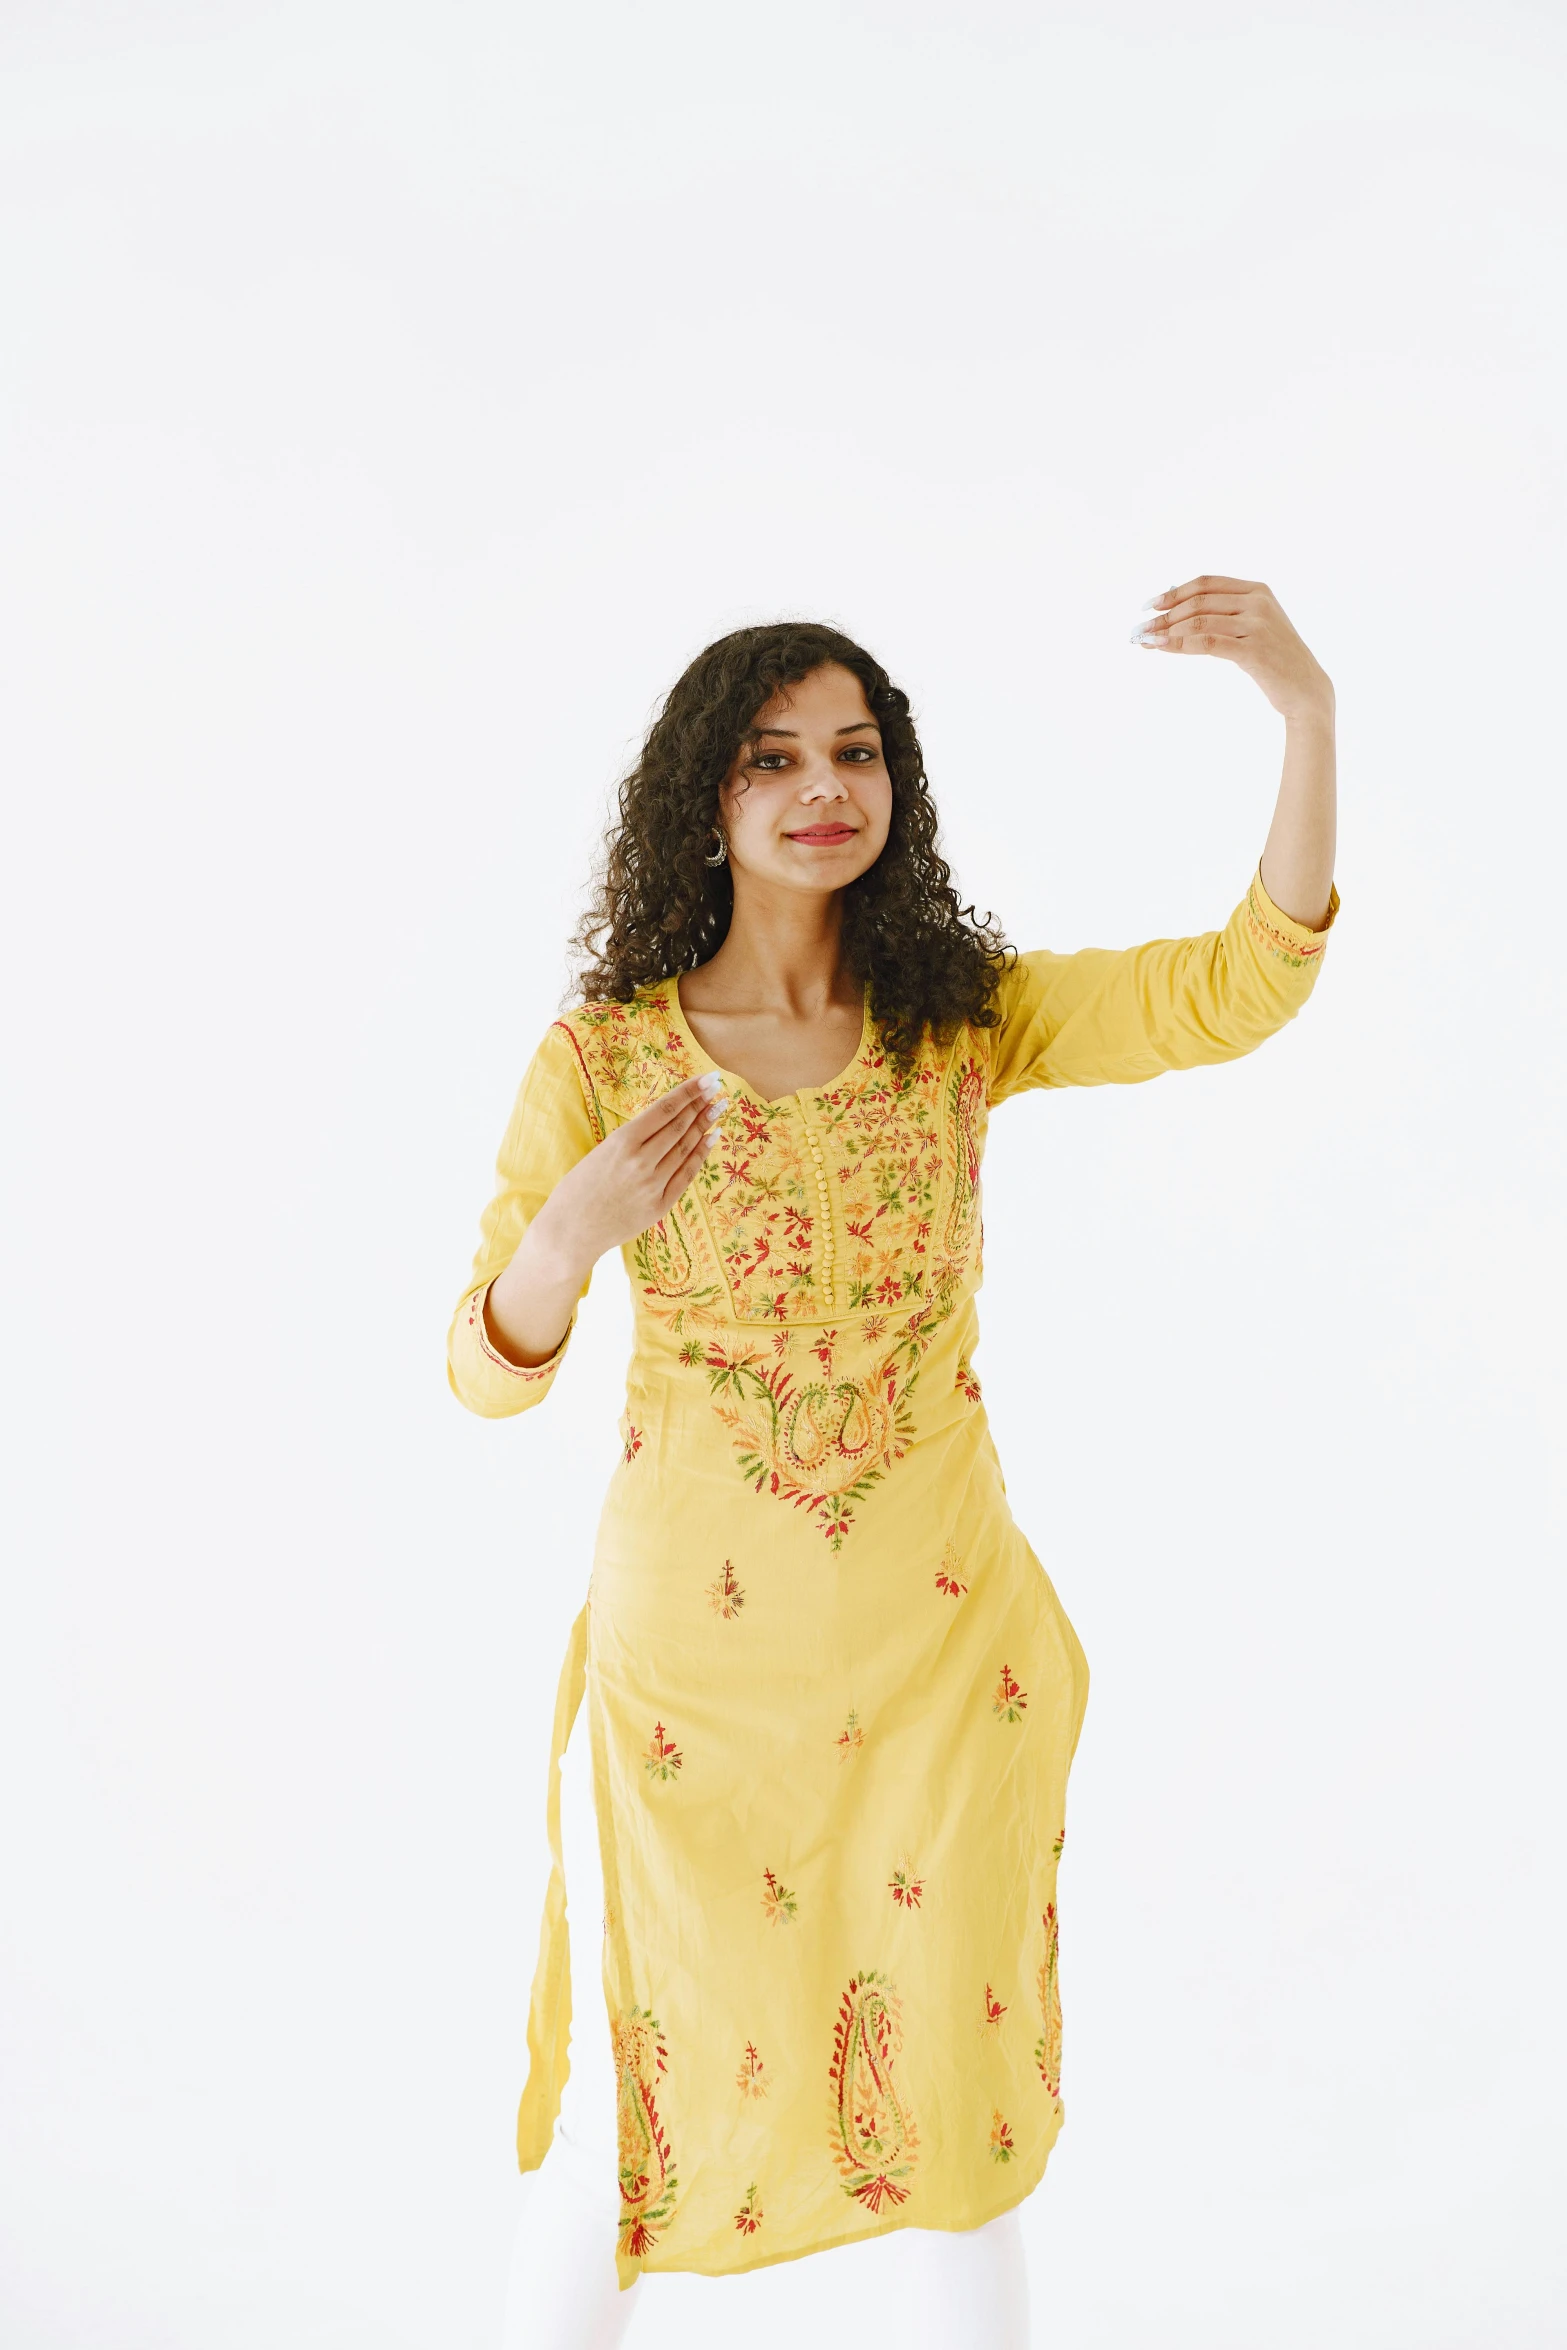 a woman standing wearing a yellow dress and posing for a po